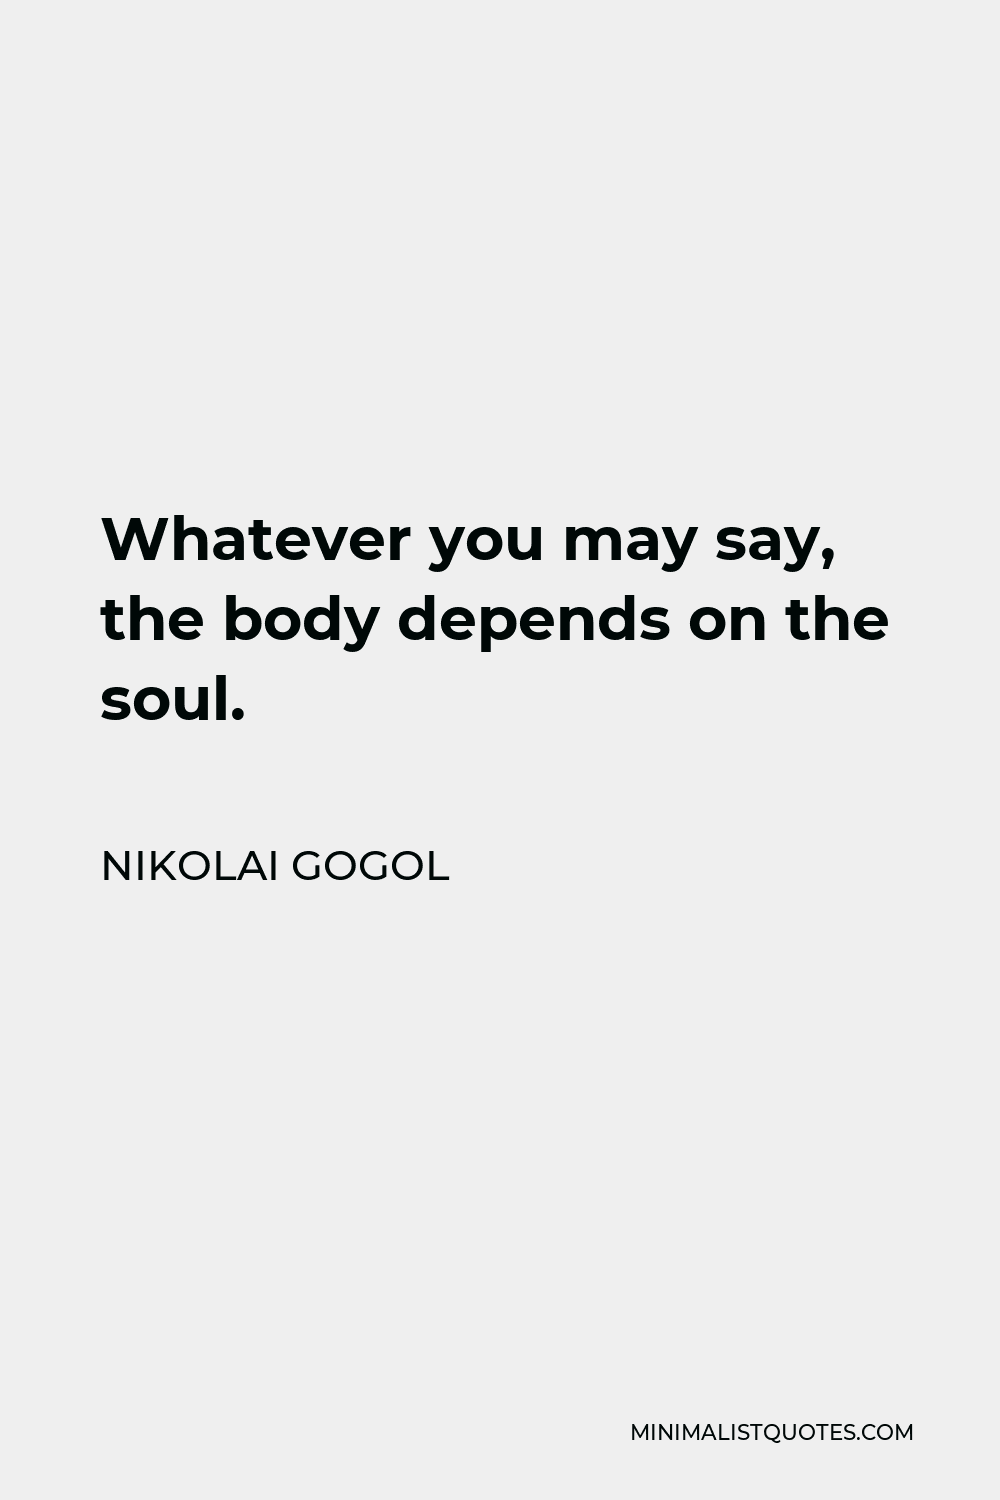 Nikolai Gogol Quote - Whatever you may say, the body depends on the soul.